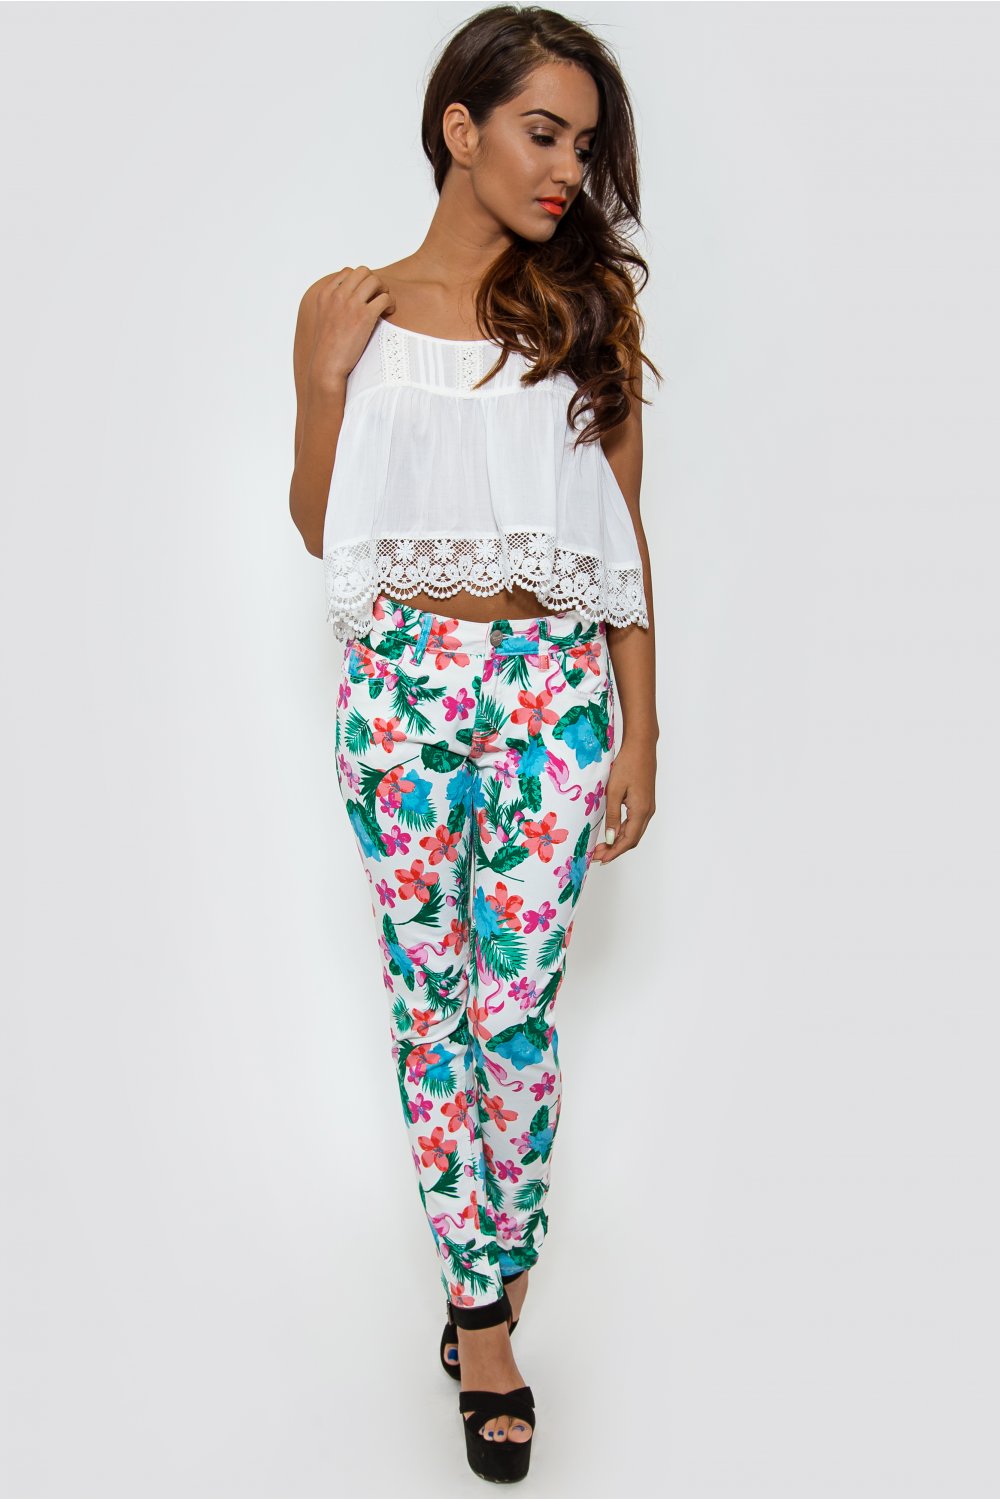 Limited Edition Flamingo Print Tropical Jeans